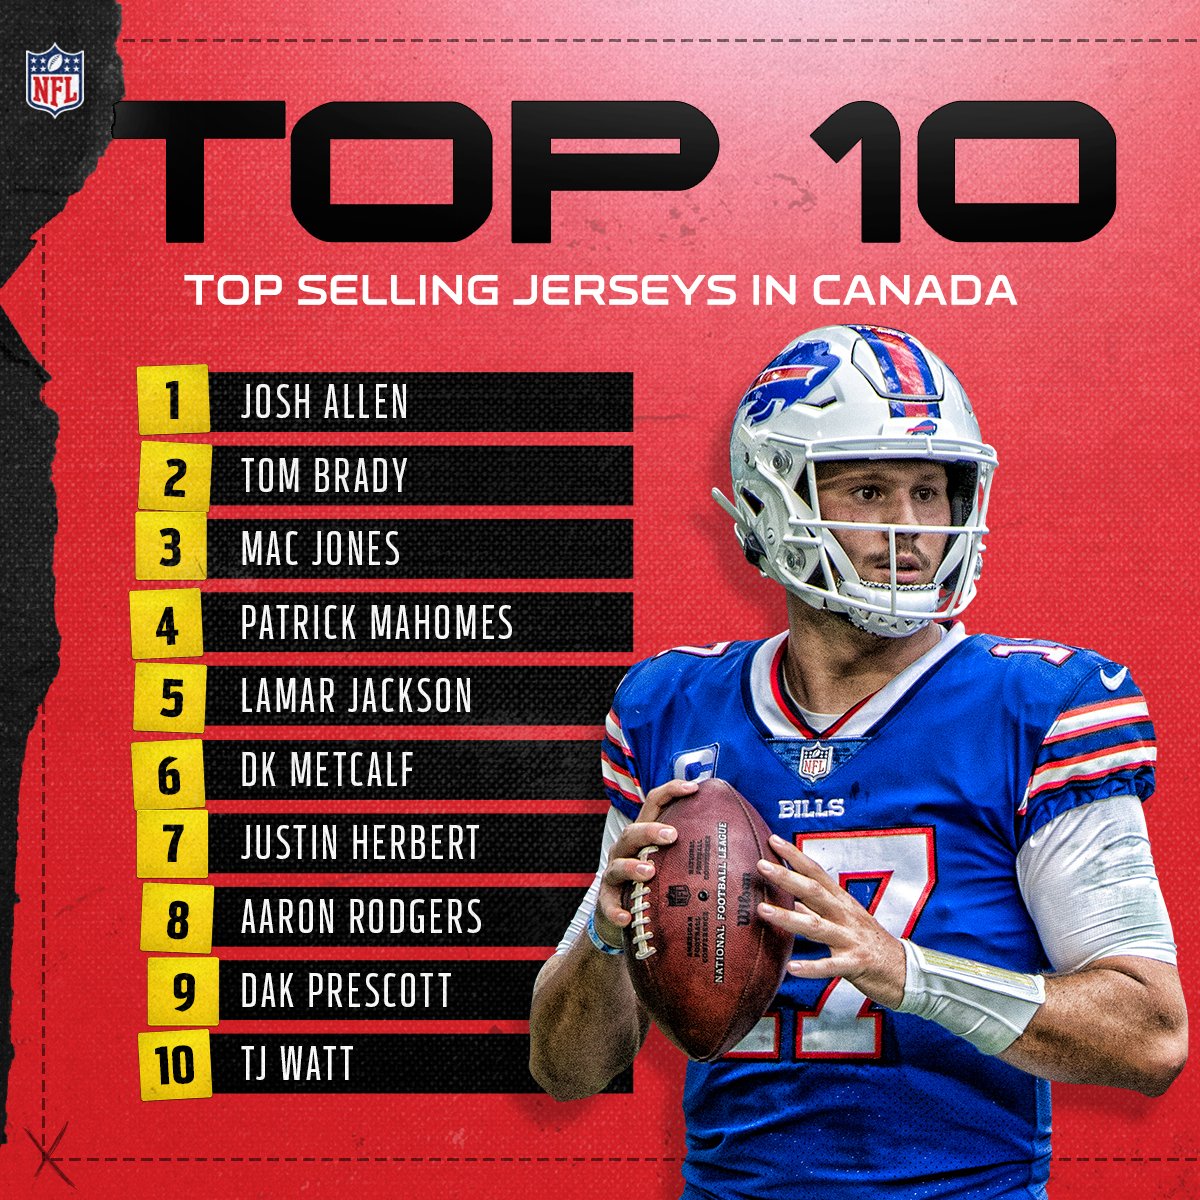 spænding gele data NFL Canada on Twitter: "The top selling NFL jerseys in 🇨🇦 so far this  season. 👀 Do you have any of these in your collection?  https://t.co/wPYIoNuRdu" / Twitter